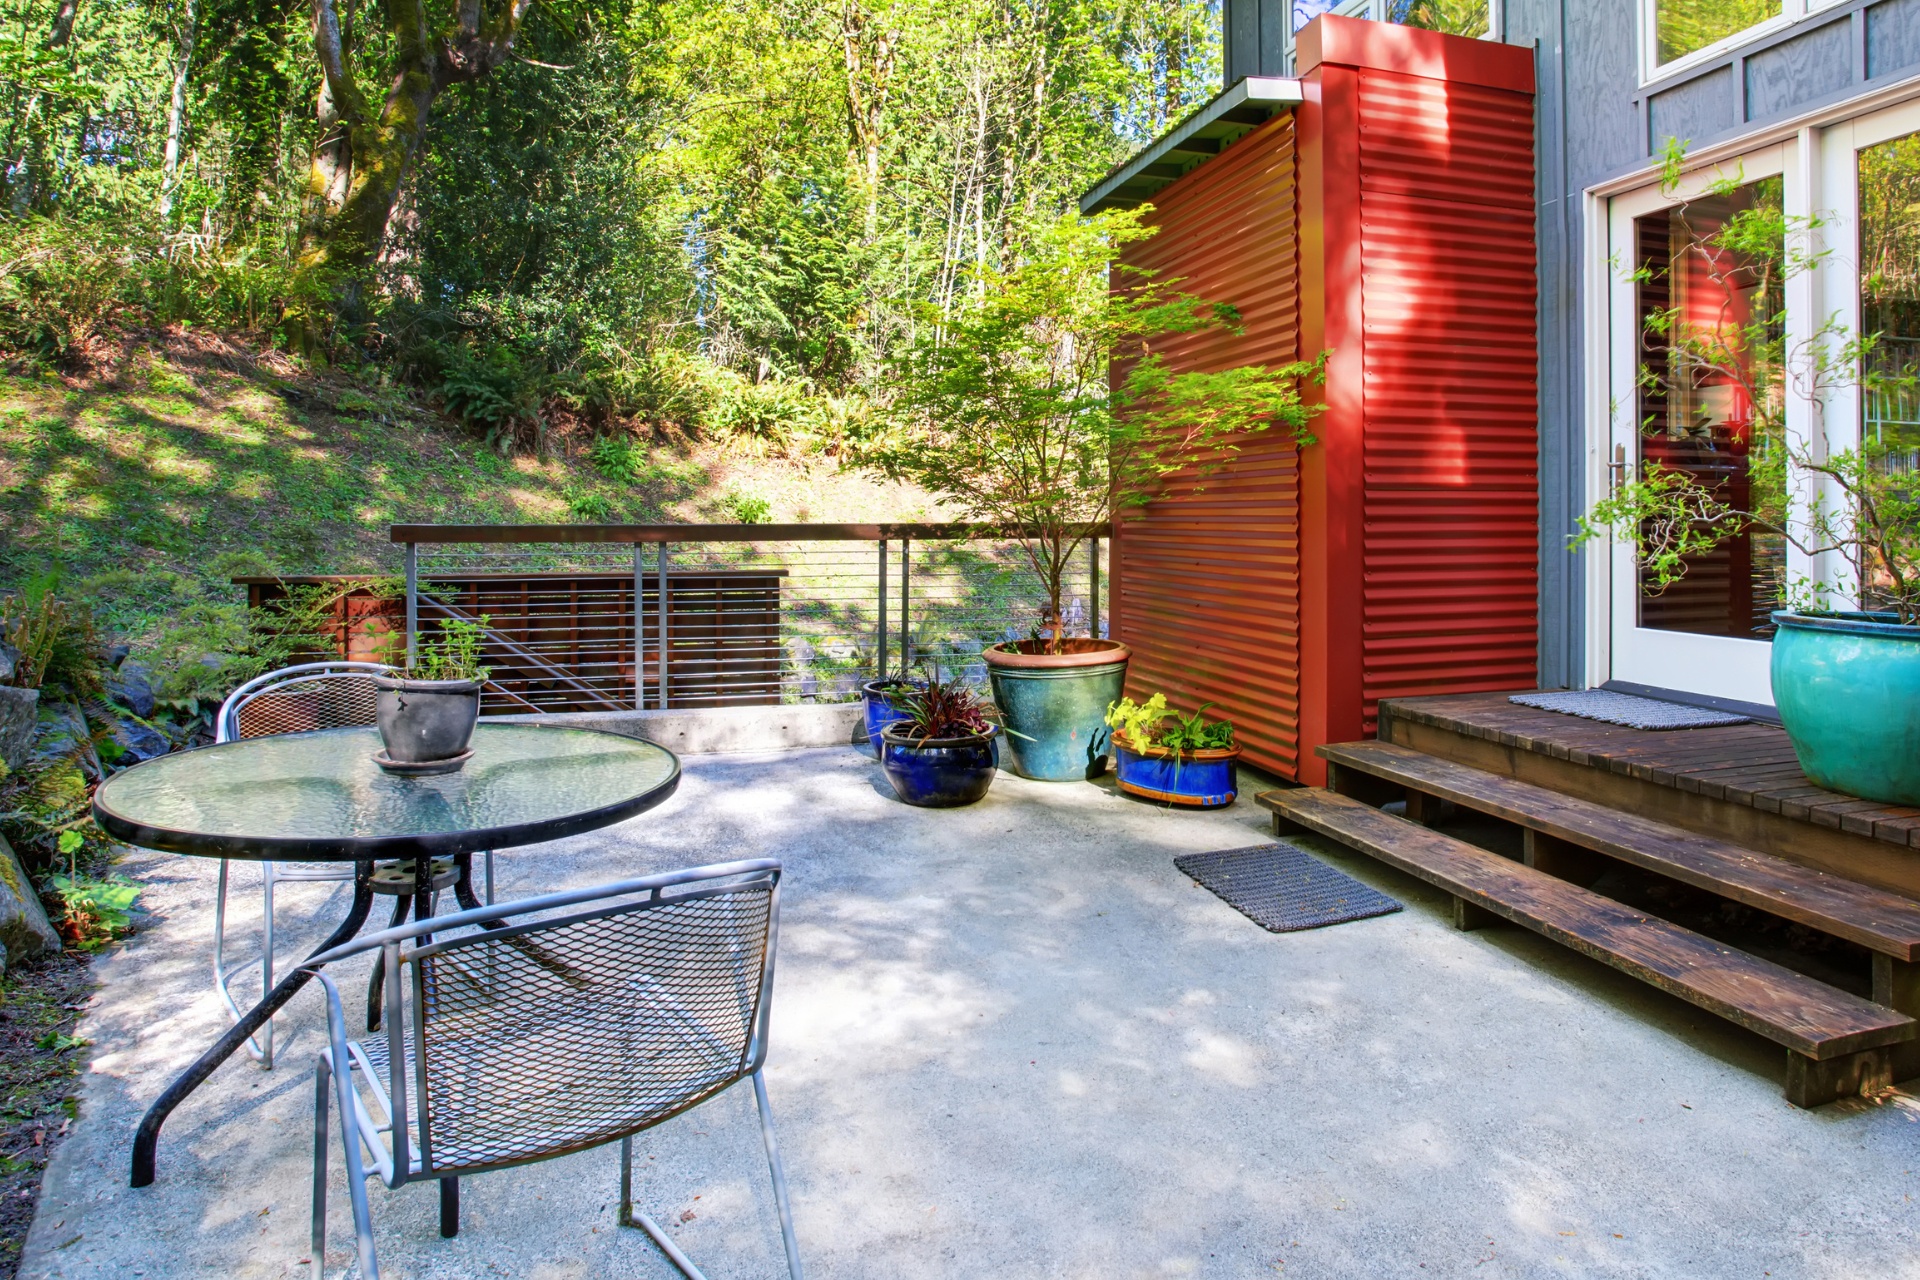 A small backyard concrete patio next to a brightly painted house.